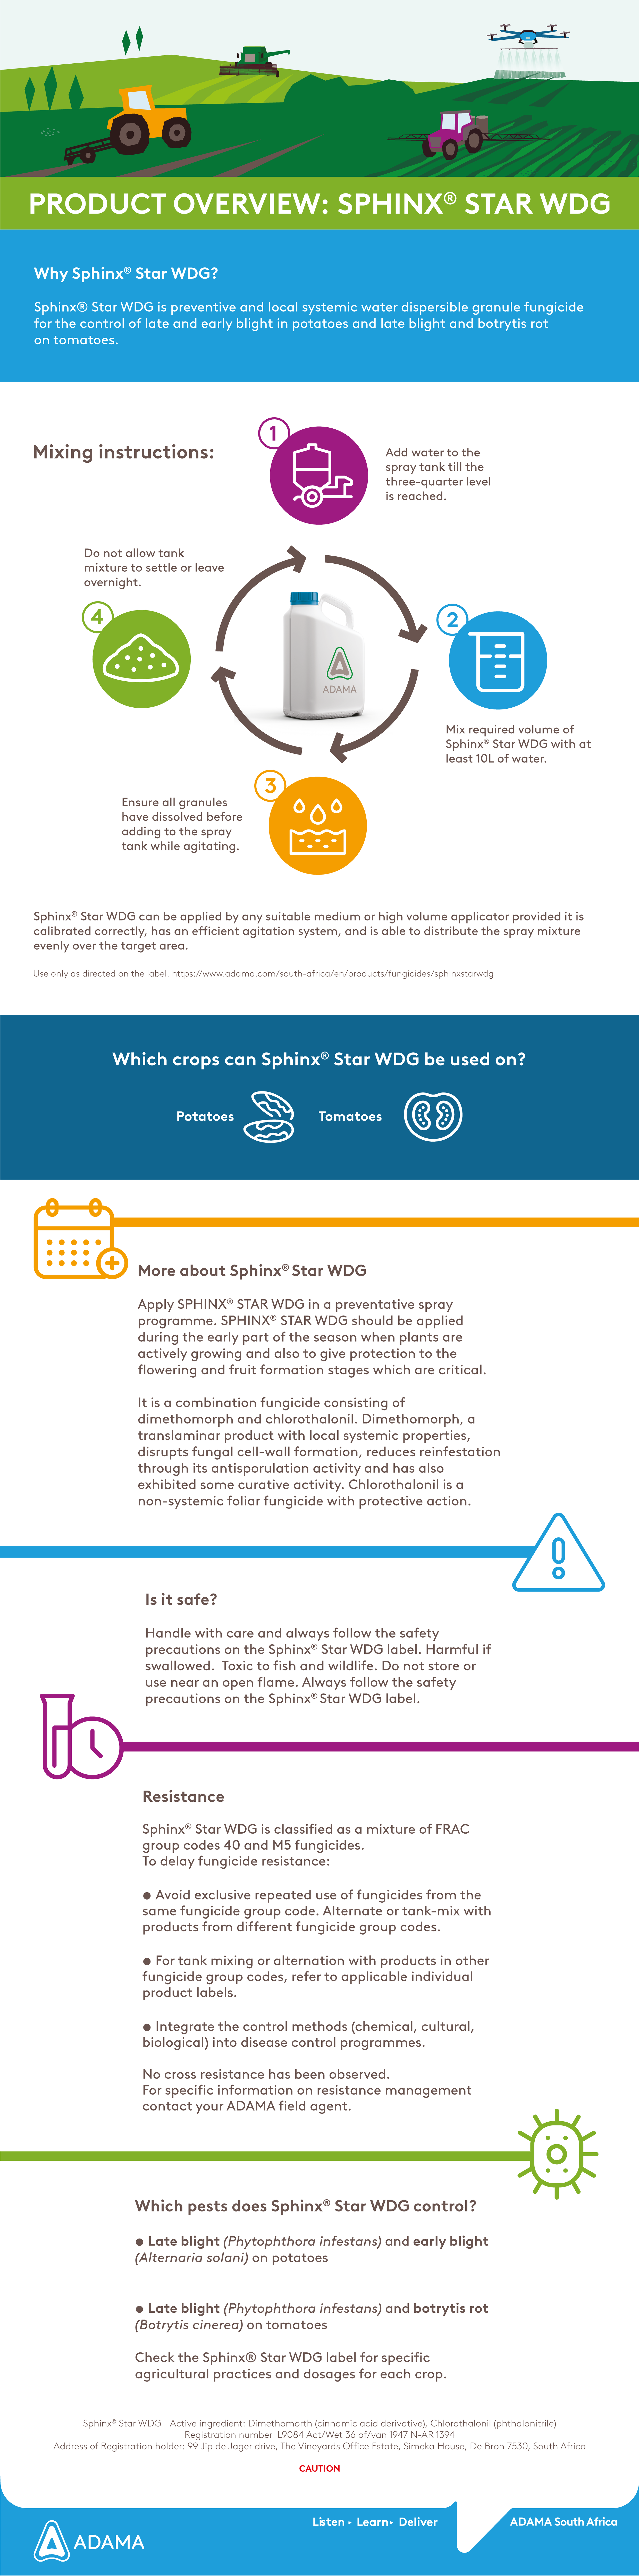 Sphinx® Star WDG Fungicide Product Overview & Infographic